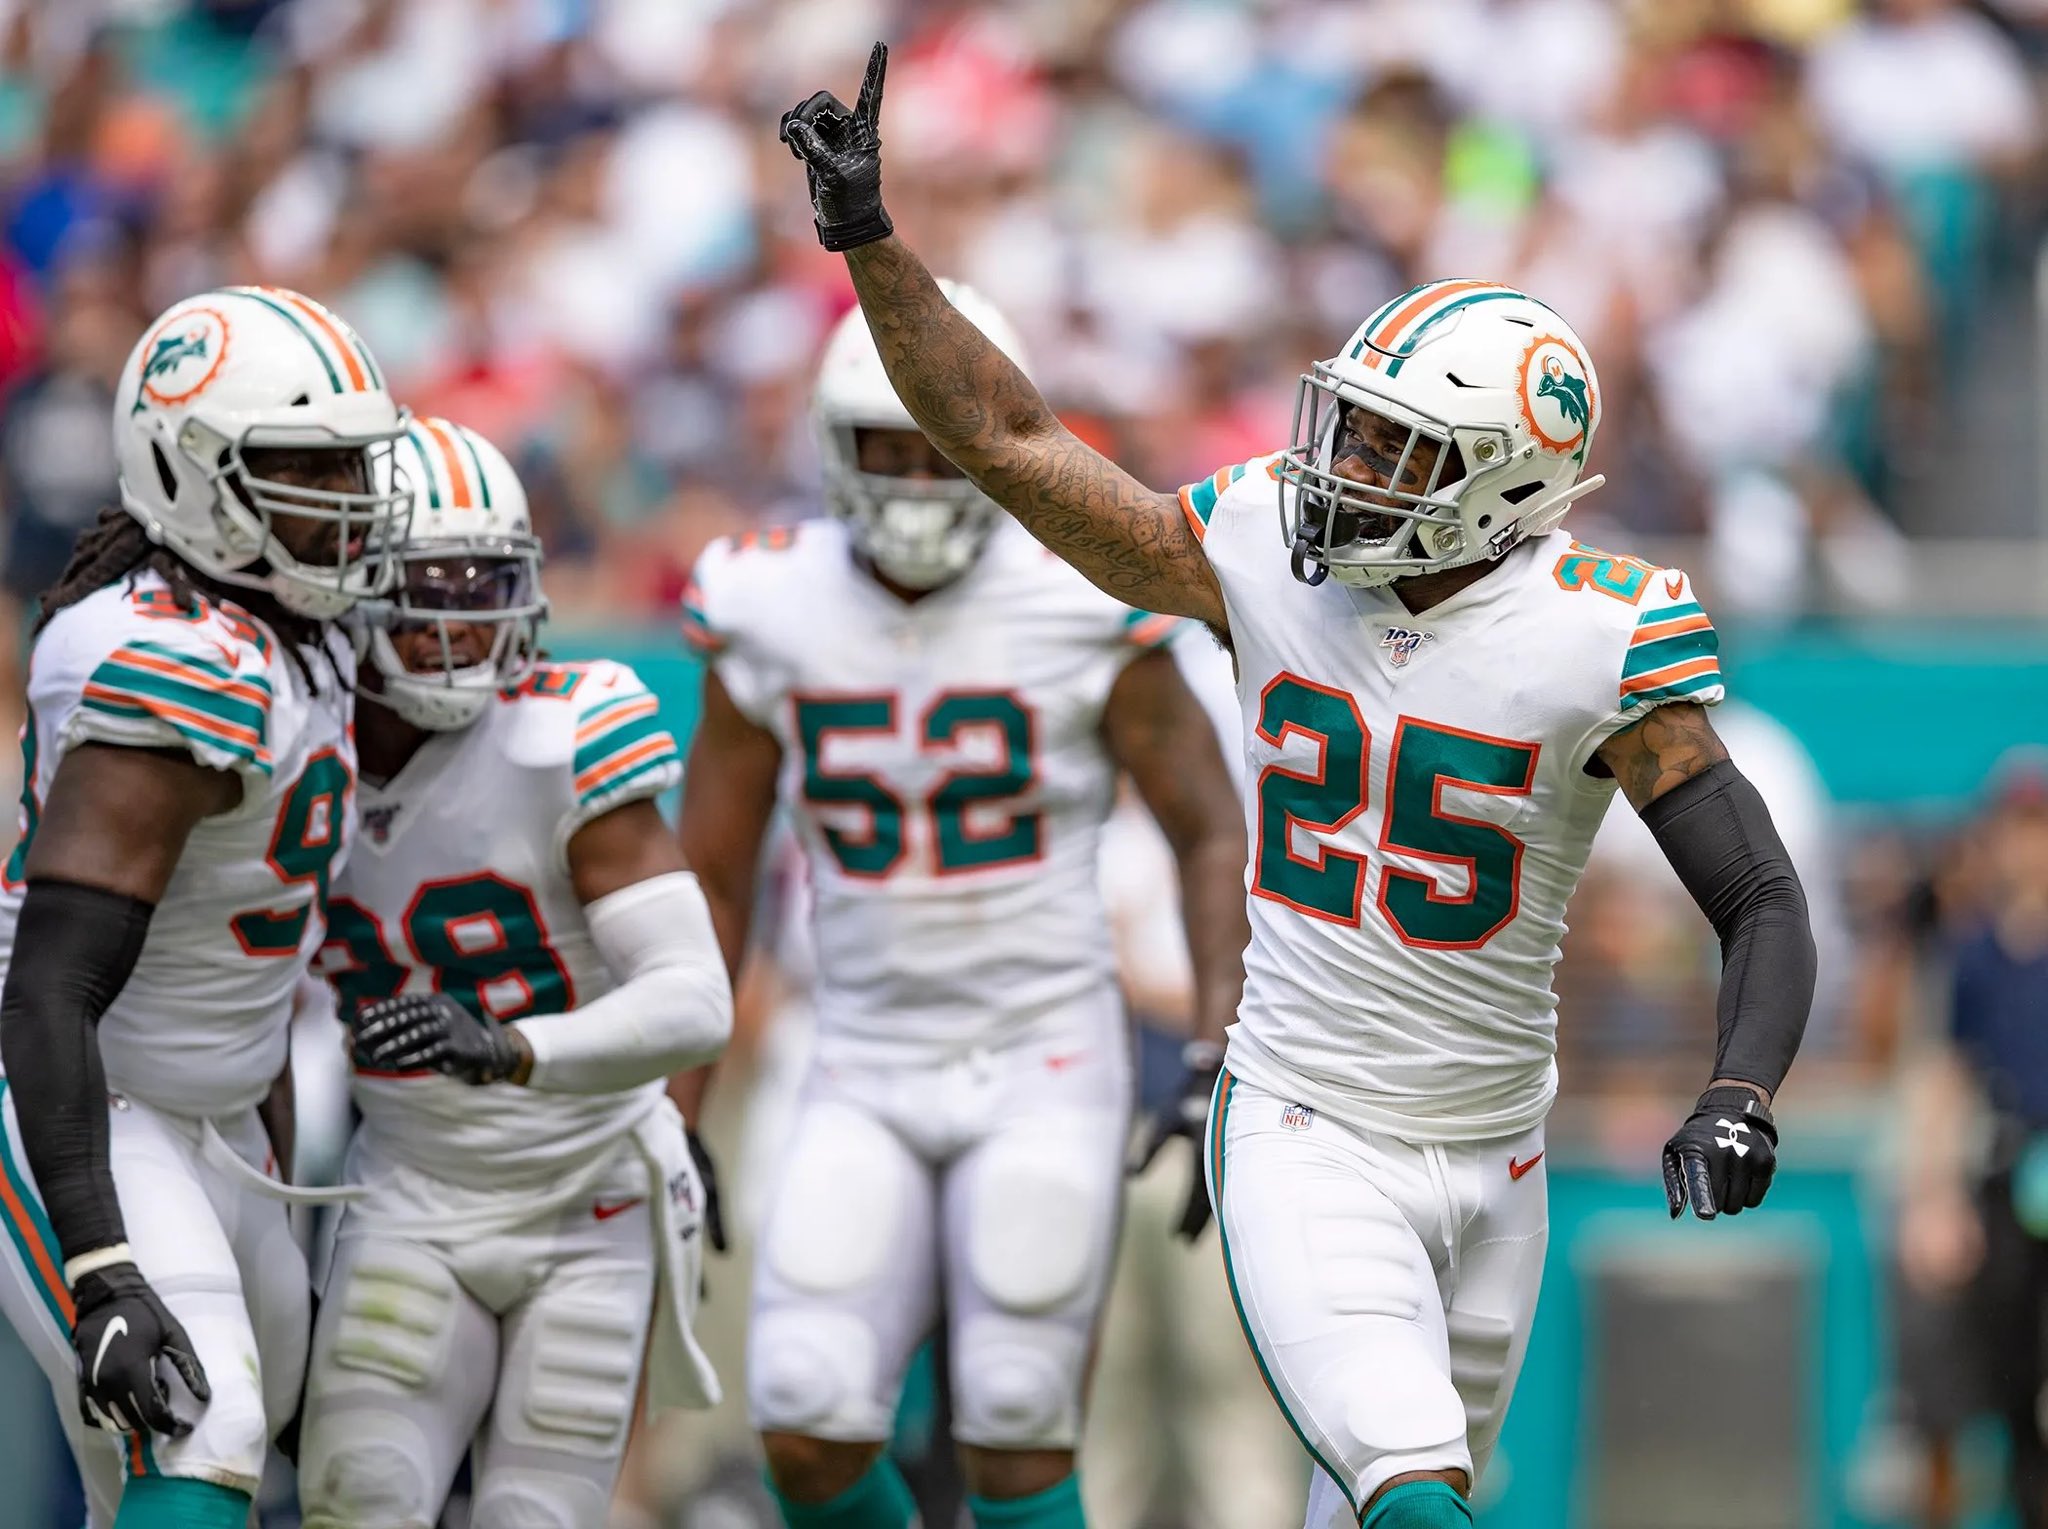 Field Yates on X: 'The Dolphins are wearing their throwback uniforms today  and they are absolutely glorious 